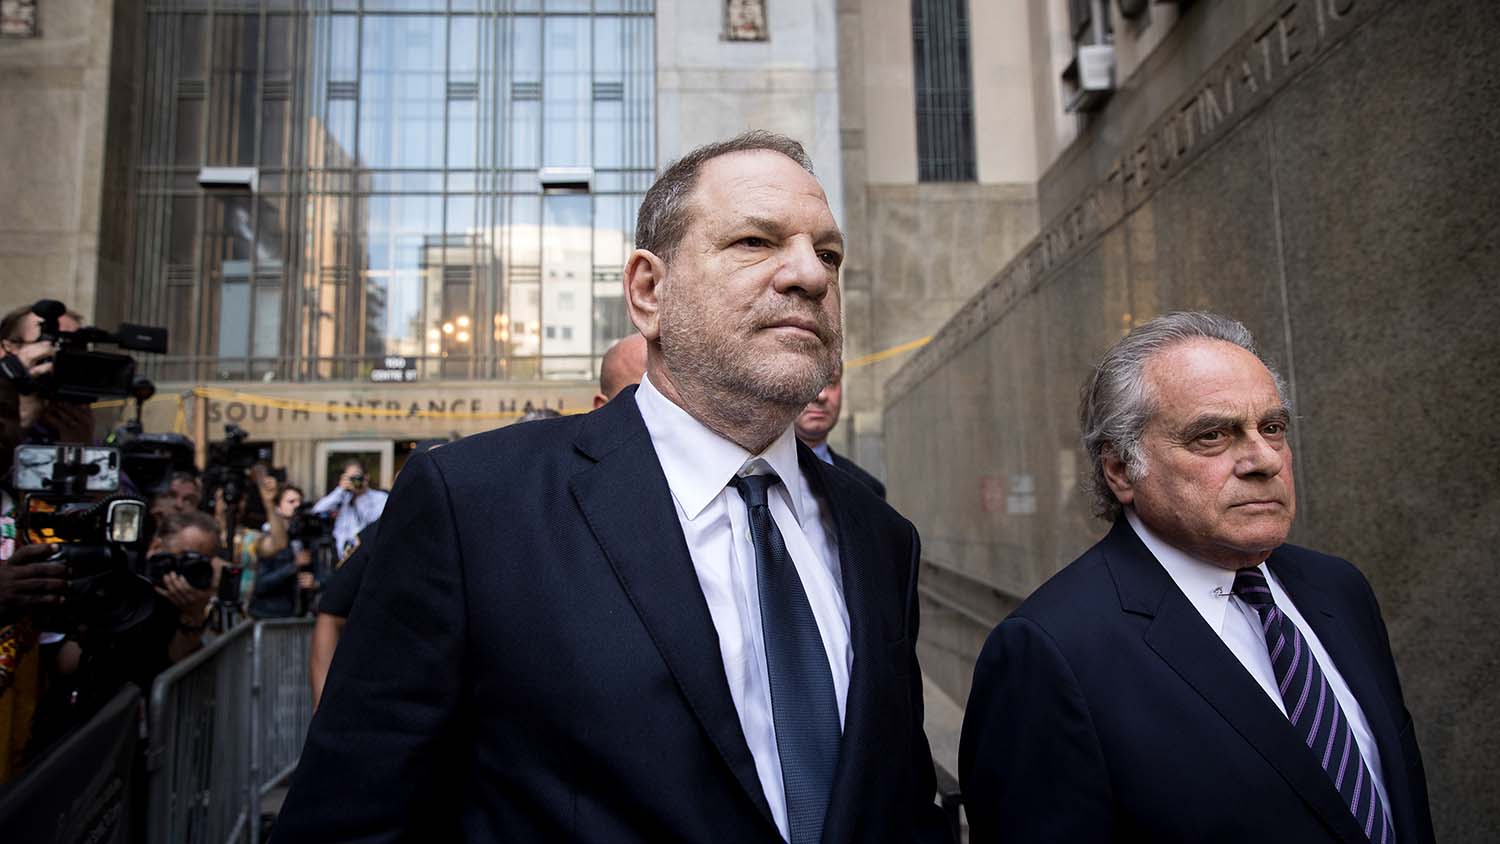 NEW YORK, NY - JUNE 5: Harvey Weinstein and attorney Benjamin Brafman exit State Supreme Court, June 5, 2018 in New York City. Weinstein pleaded not guilty on two counts of rape and one count of a criminal sexual act. (Photo by Drew Angerer/Getty Images)